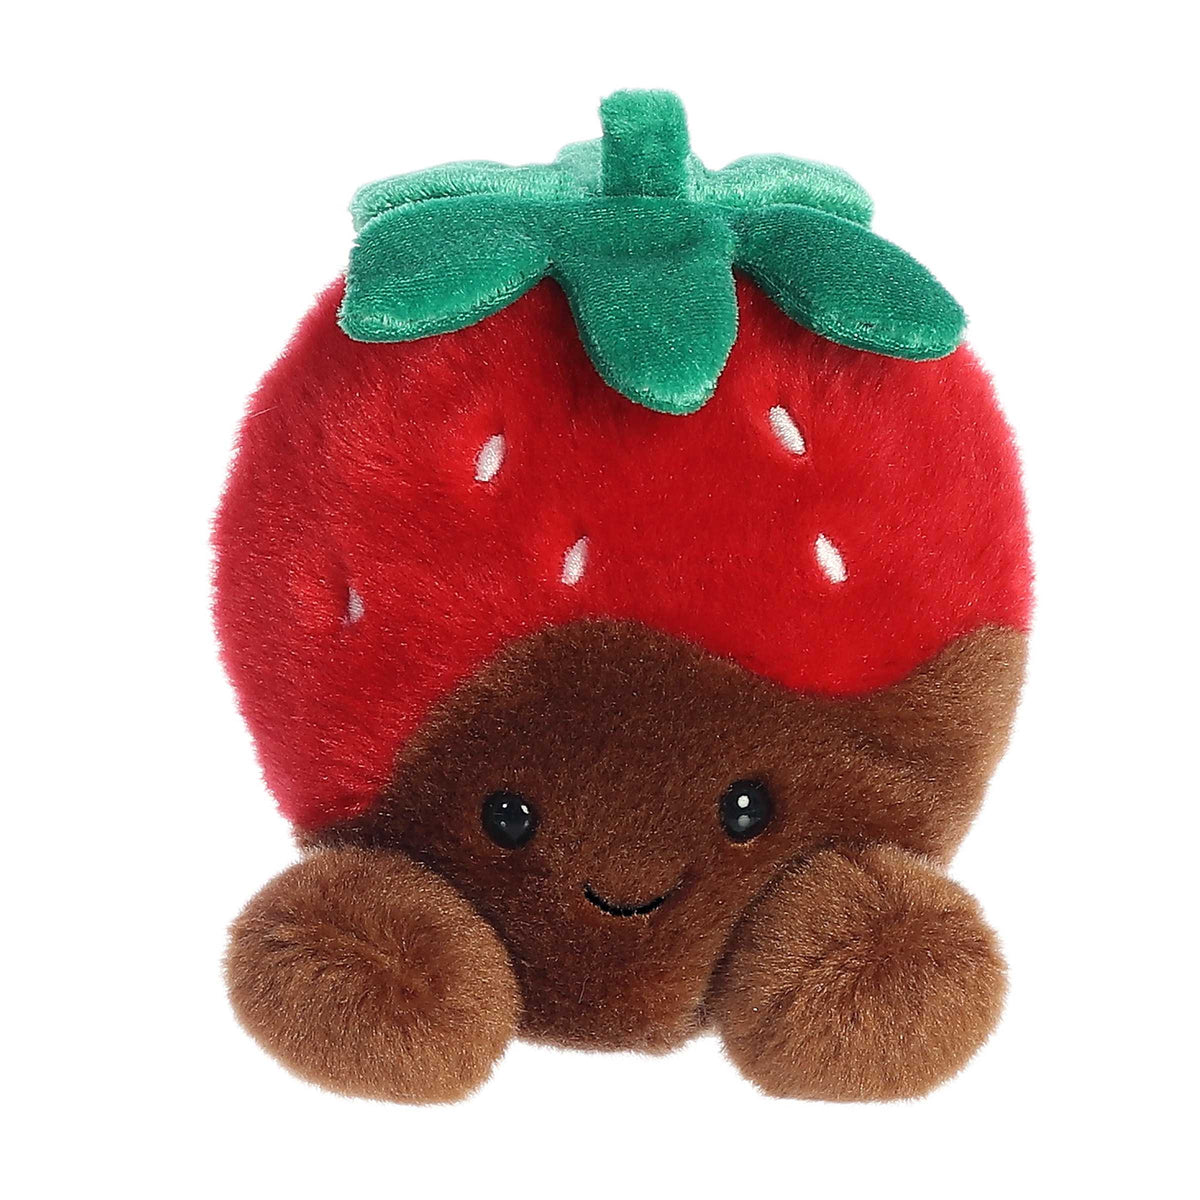 Strawberry plush from Palm Pals, capturing the essence of a strawberry dipped in rich chocolate with a charming smile.